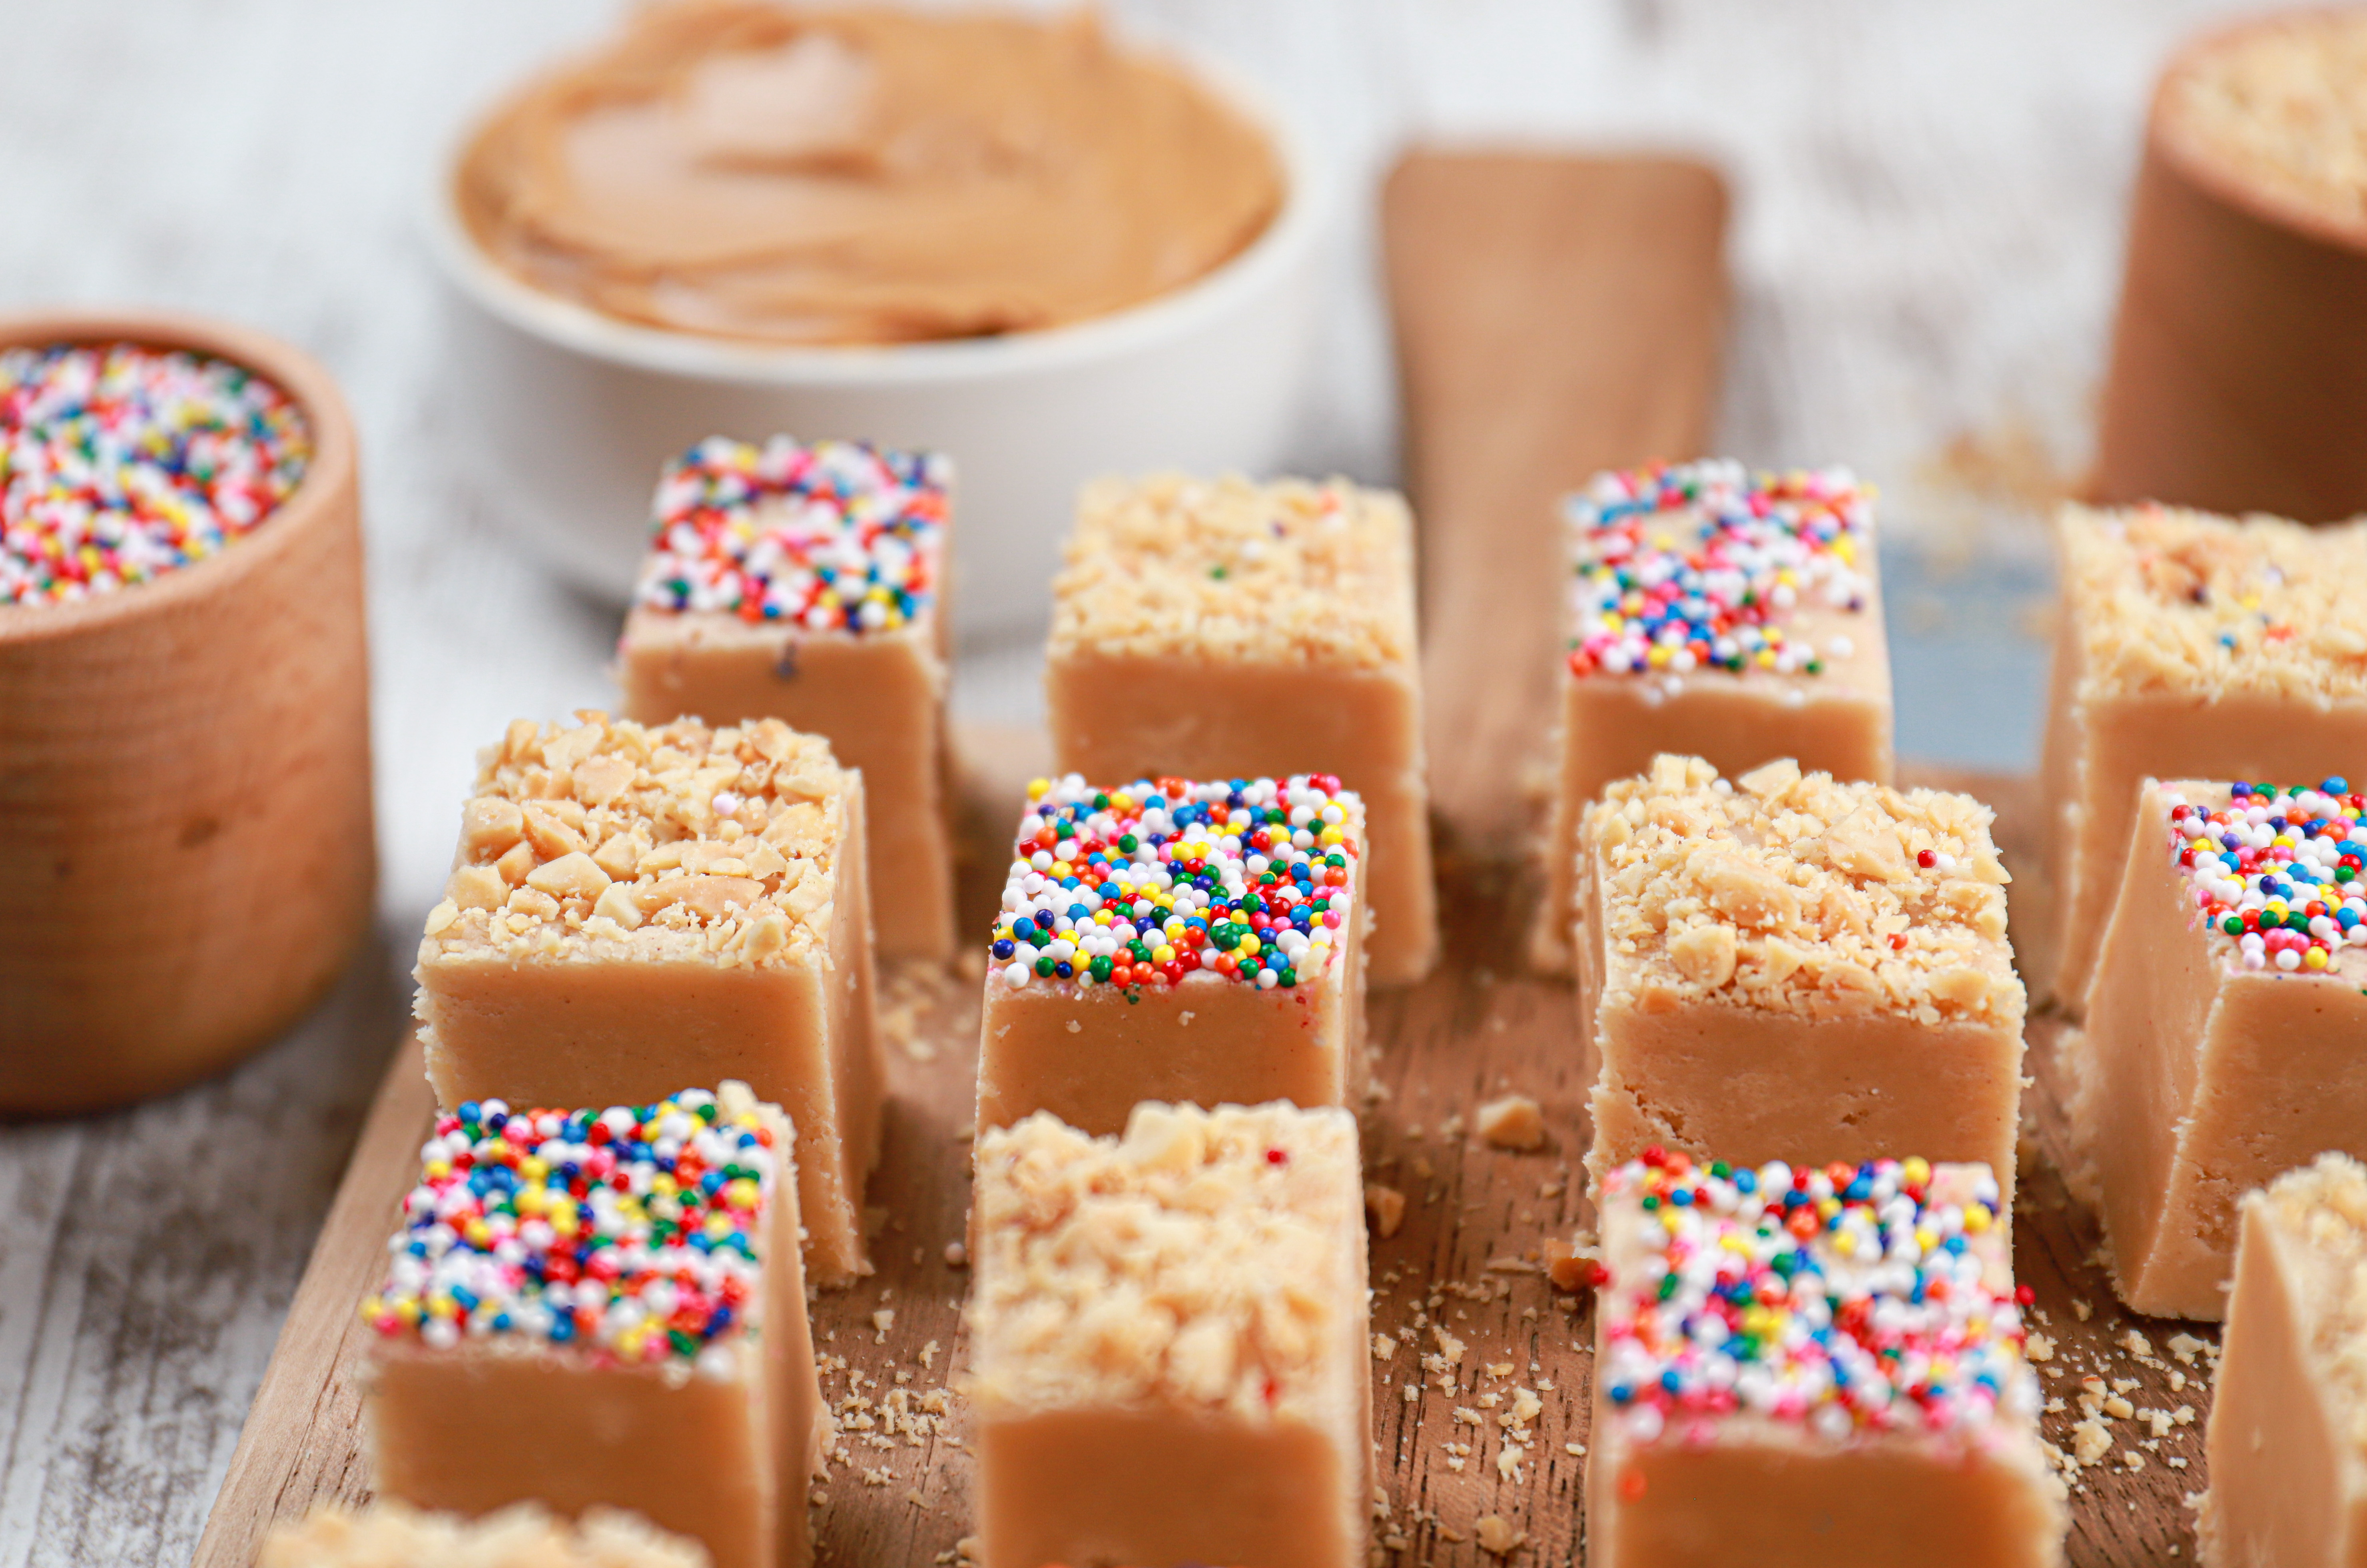 Up close view of a pieces of peanut butter fudge on a wooden cutting board with cups of sprinkles and peanut butter in the background.